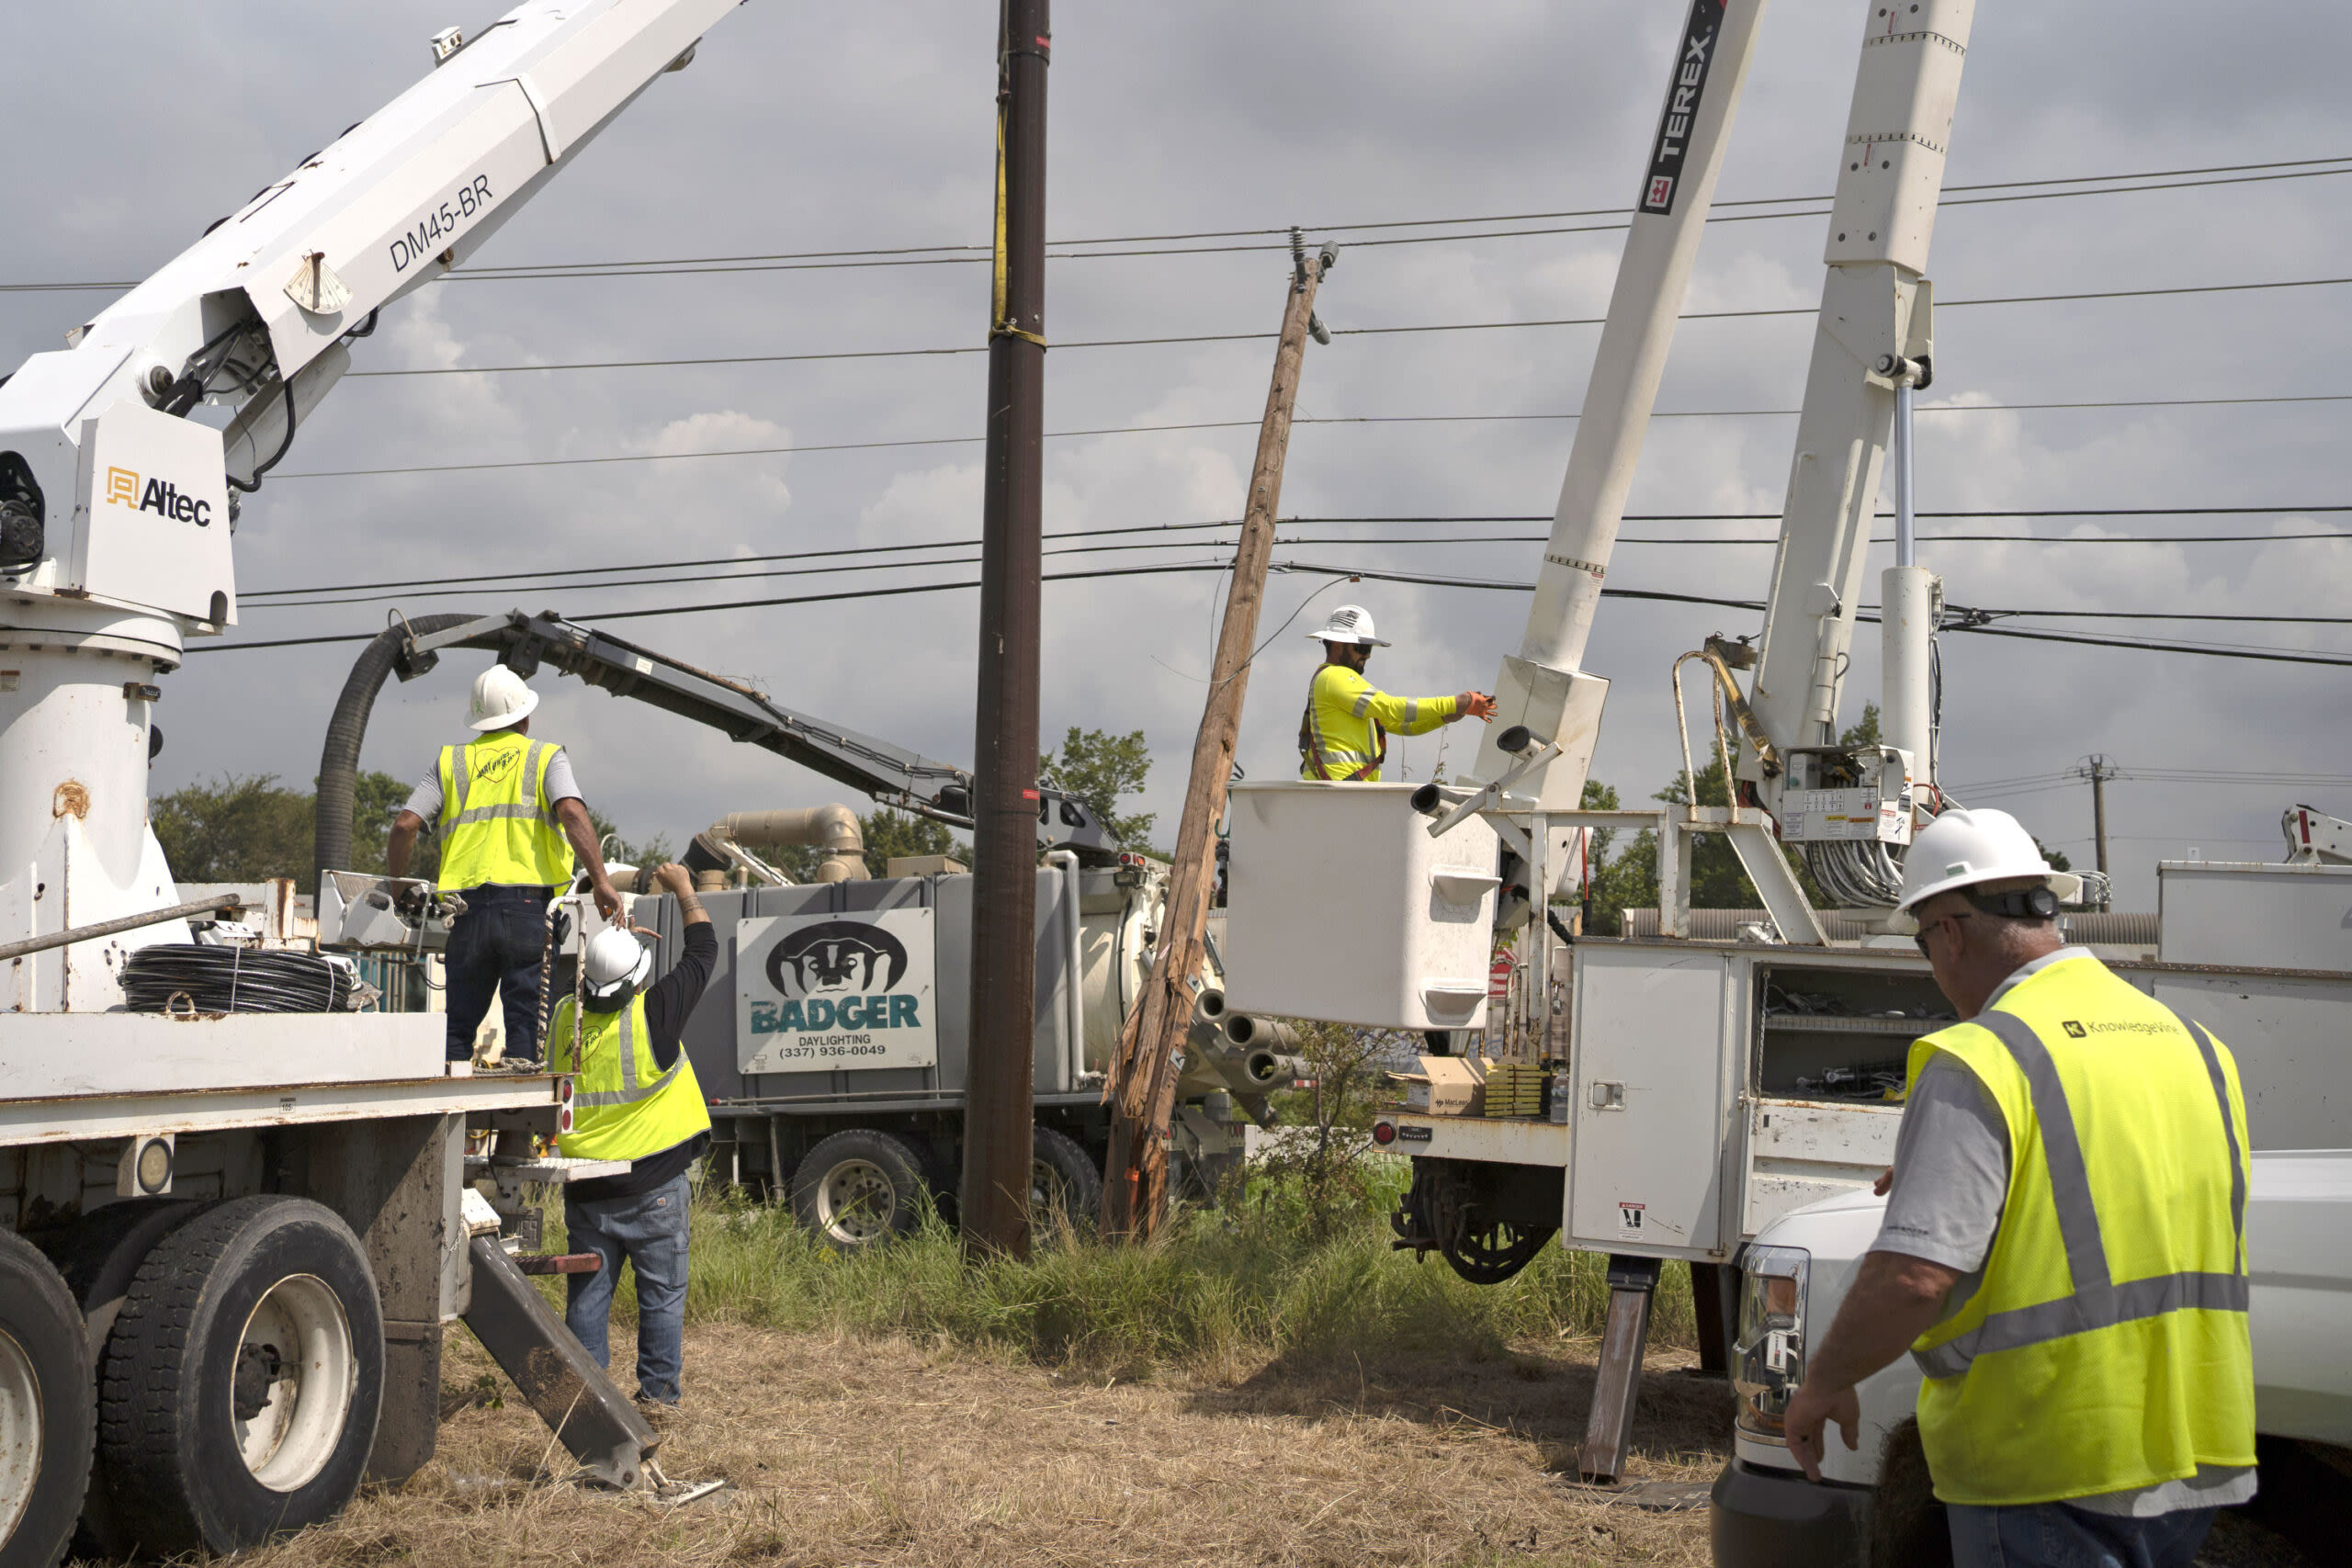 Houston Utility Slammed Over Fumbled Response to Beryl Power Outages